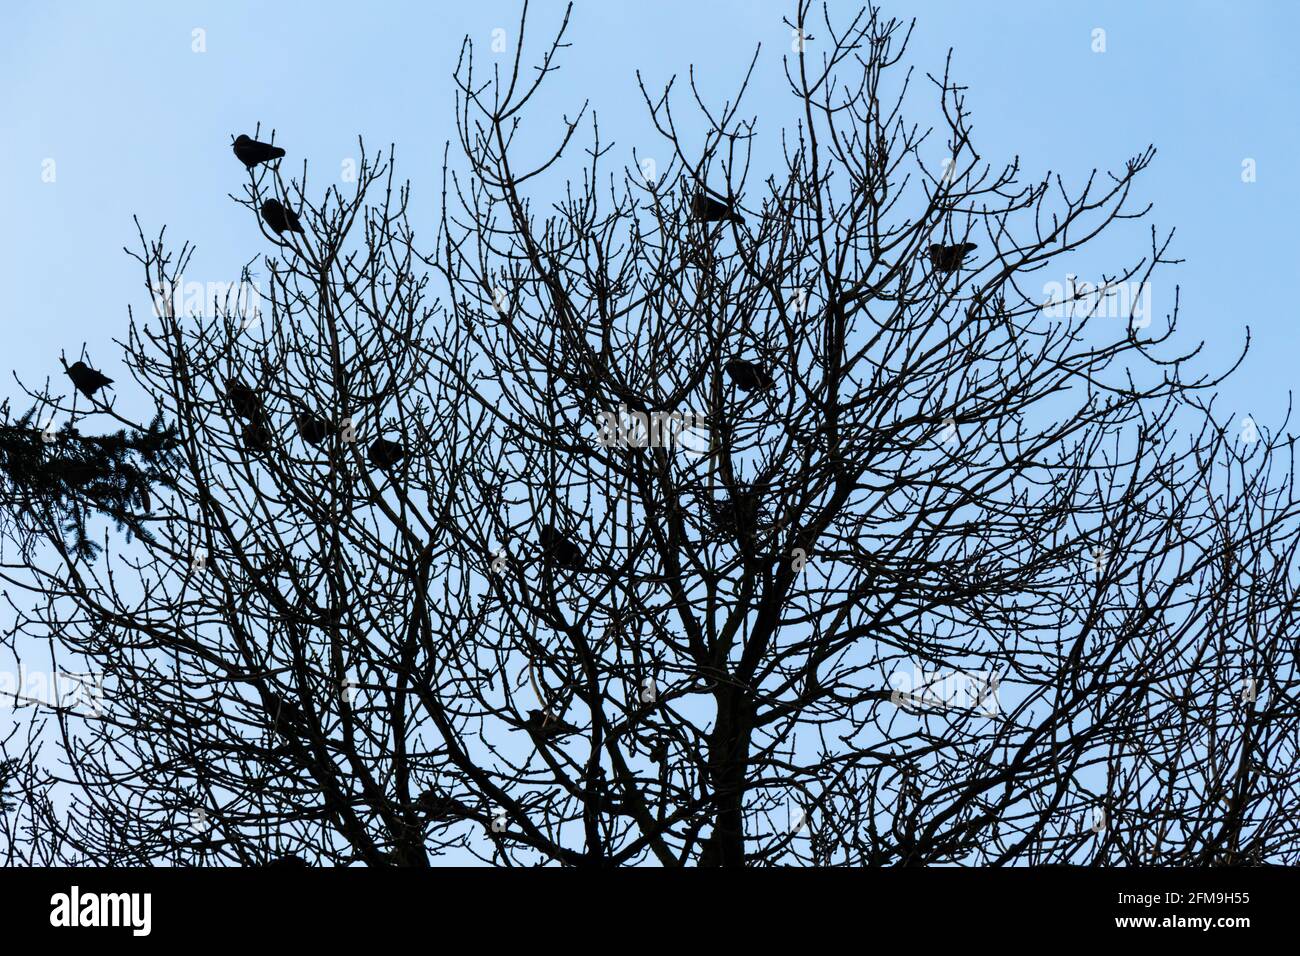 Flock of carrion crows sitting perched in a leafless tree in winter, contrasting against a blue sky Stock Photo